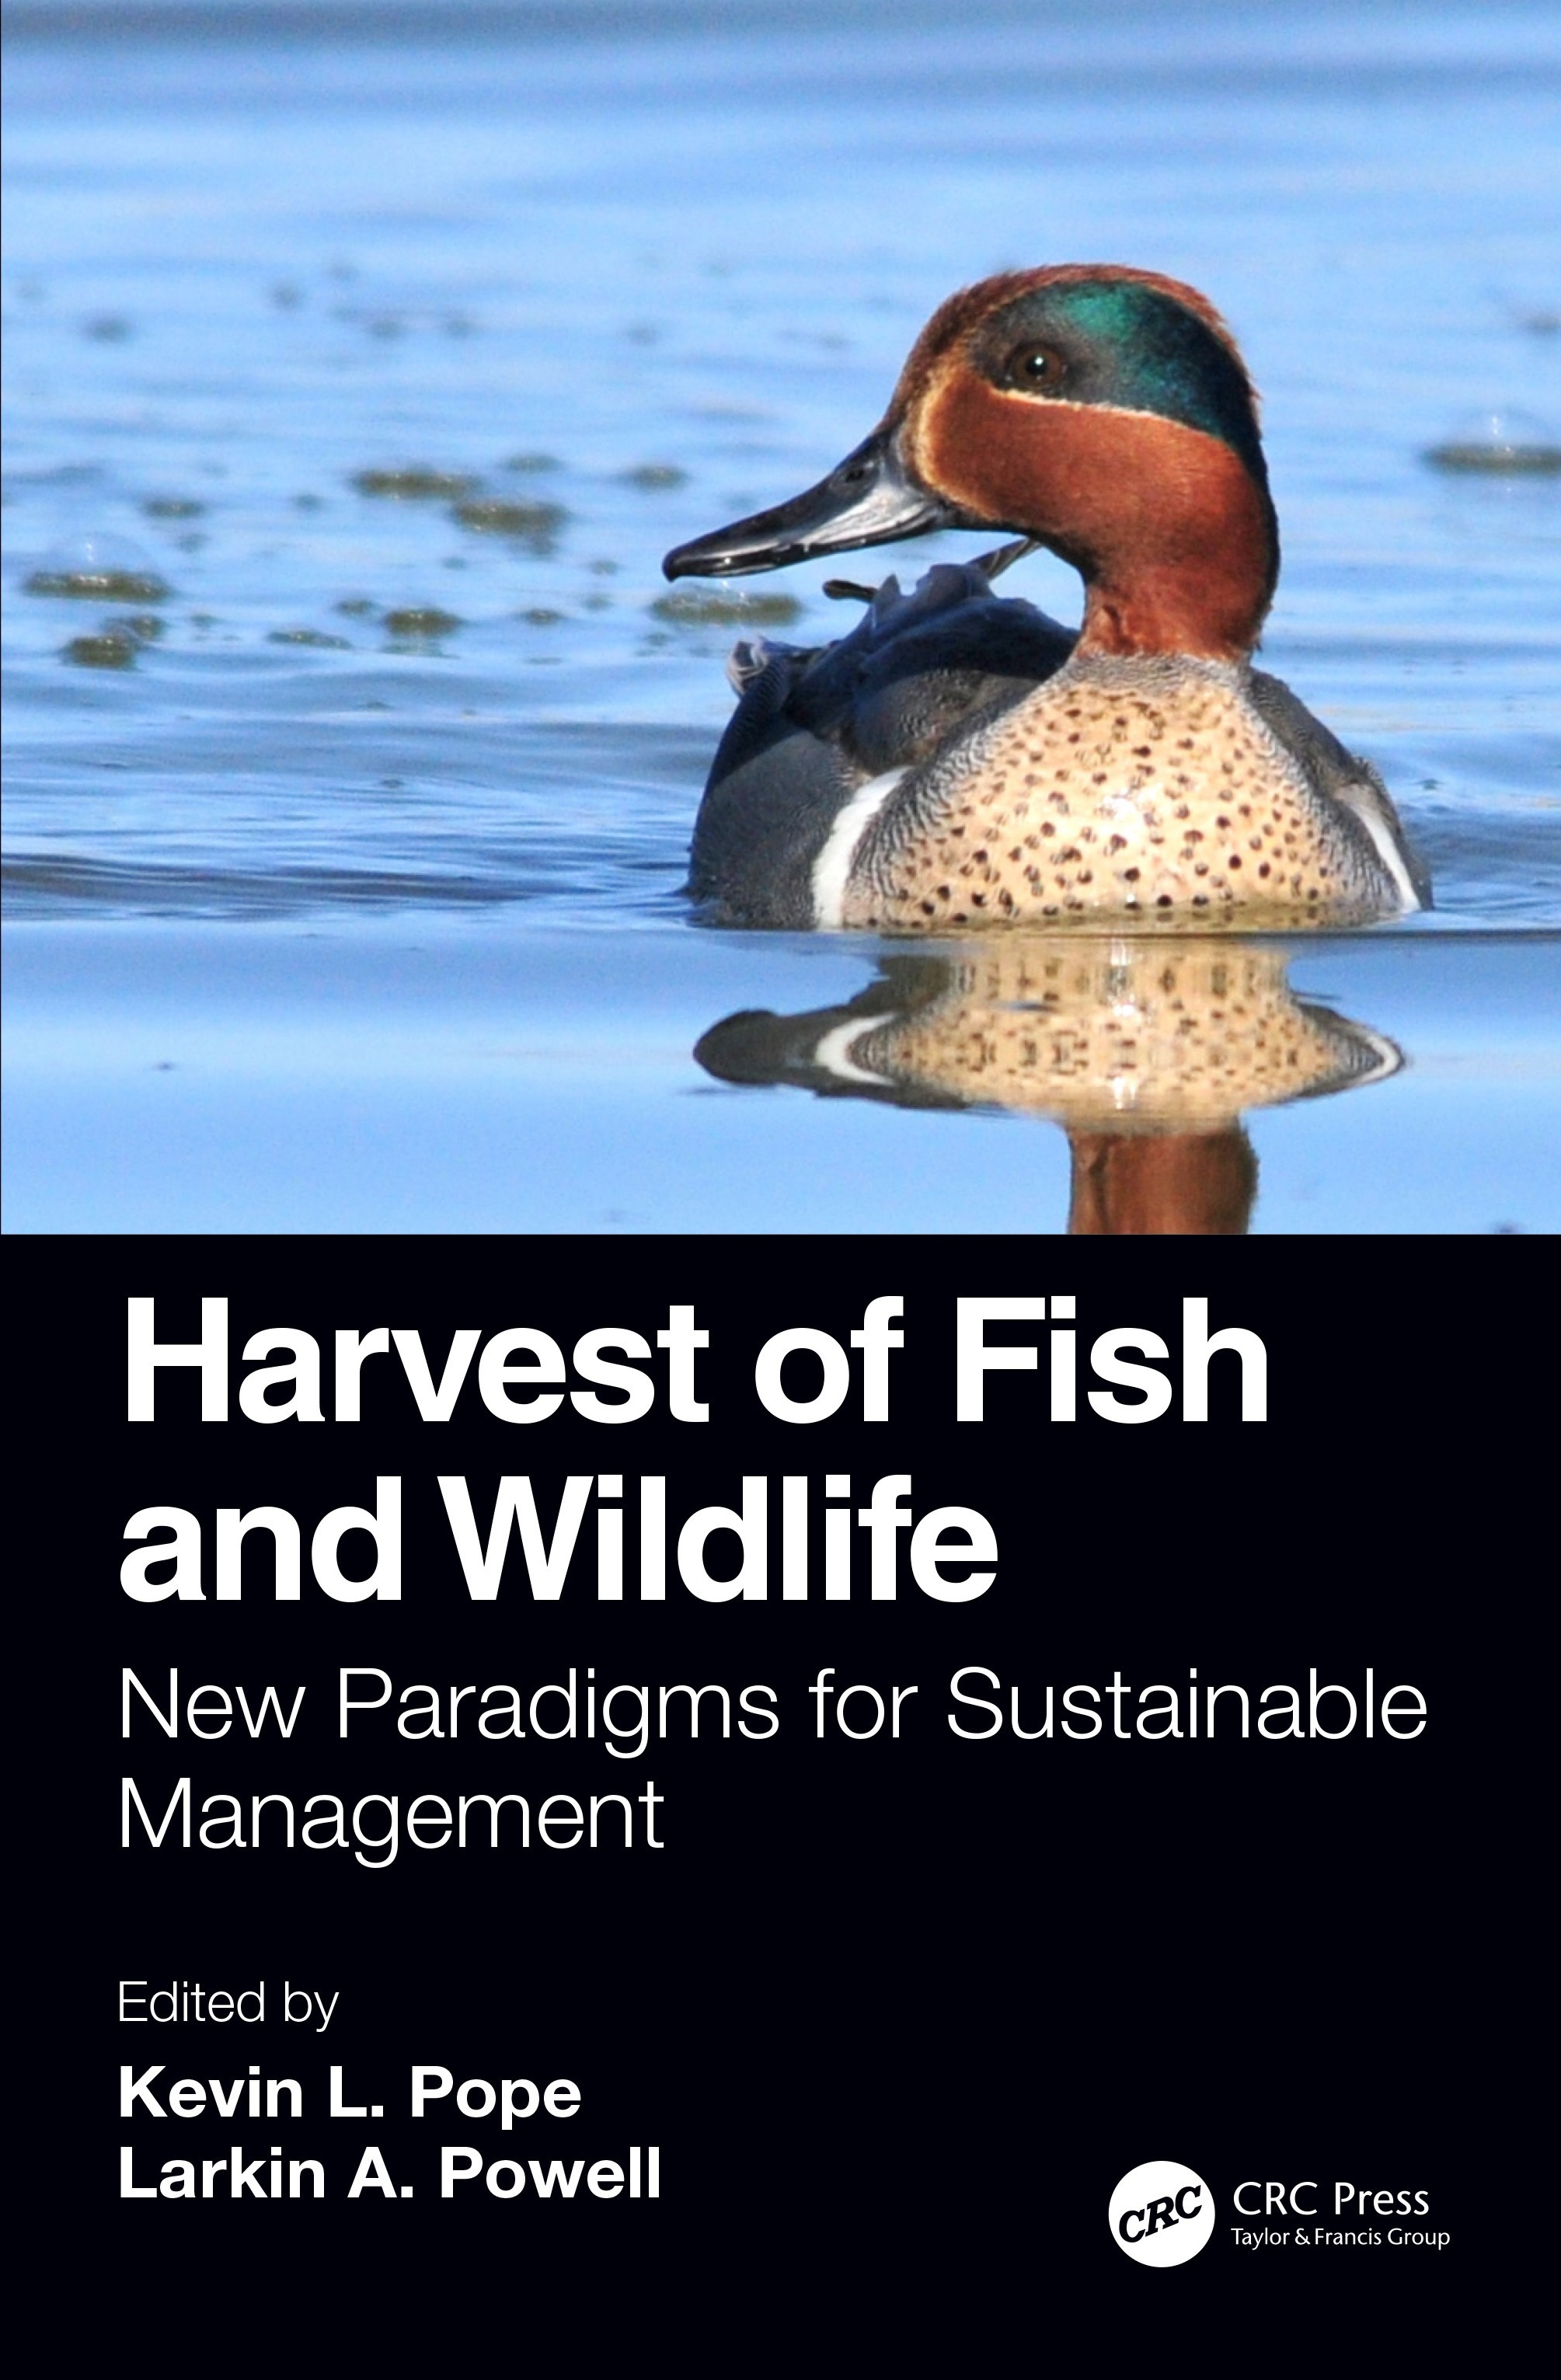 “Harvest of Fish and Wildlife: New Paradigms for Sustainable Management” will be released June 7, and is available for pre-order now. CRC Press